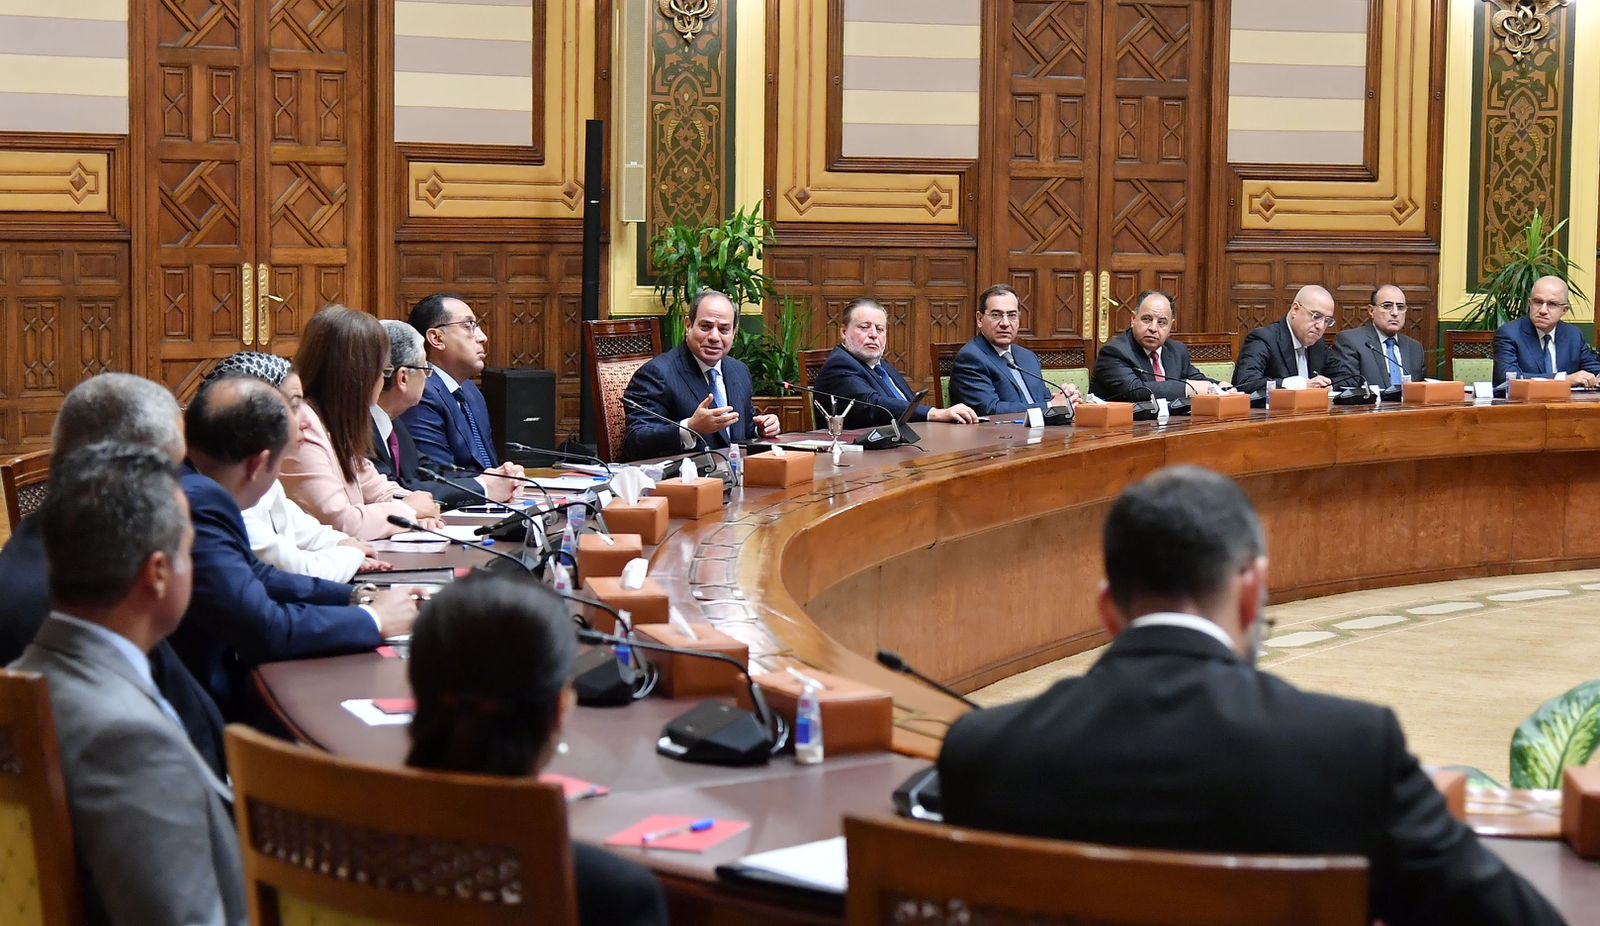 President Sisi meets with a group of Egyptian businesspeople and investors from a variety of industries.